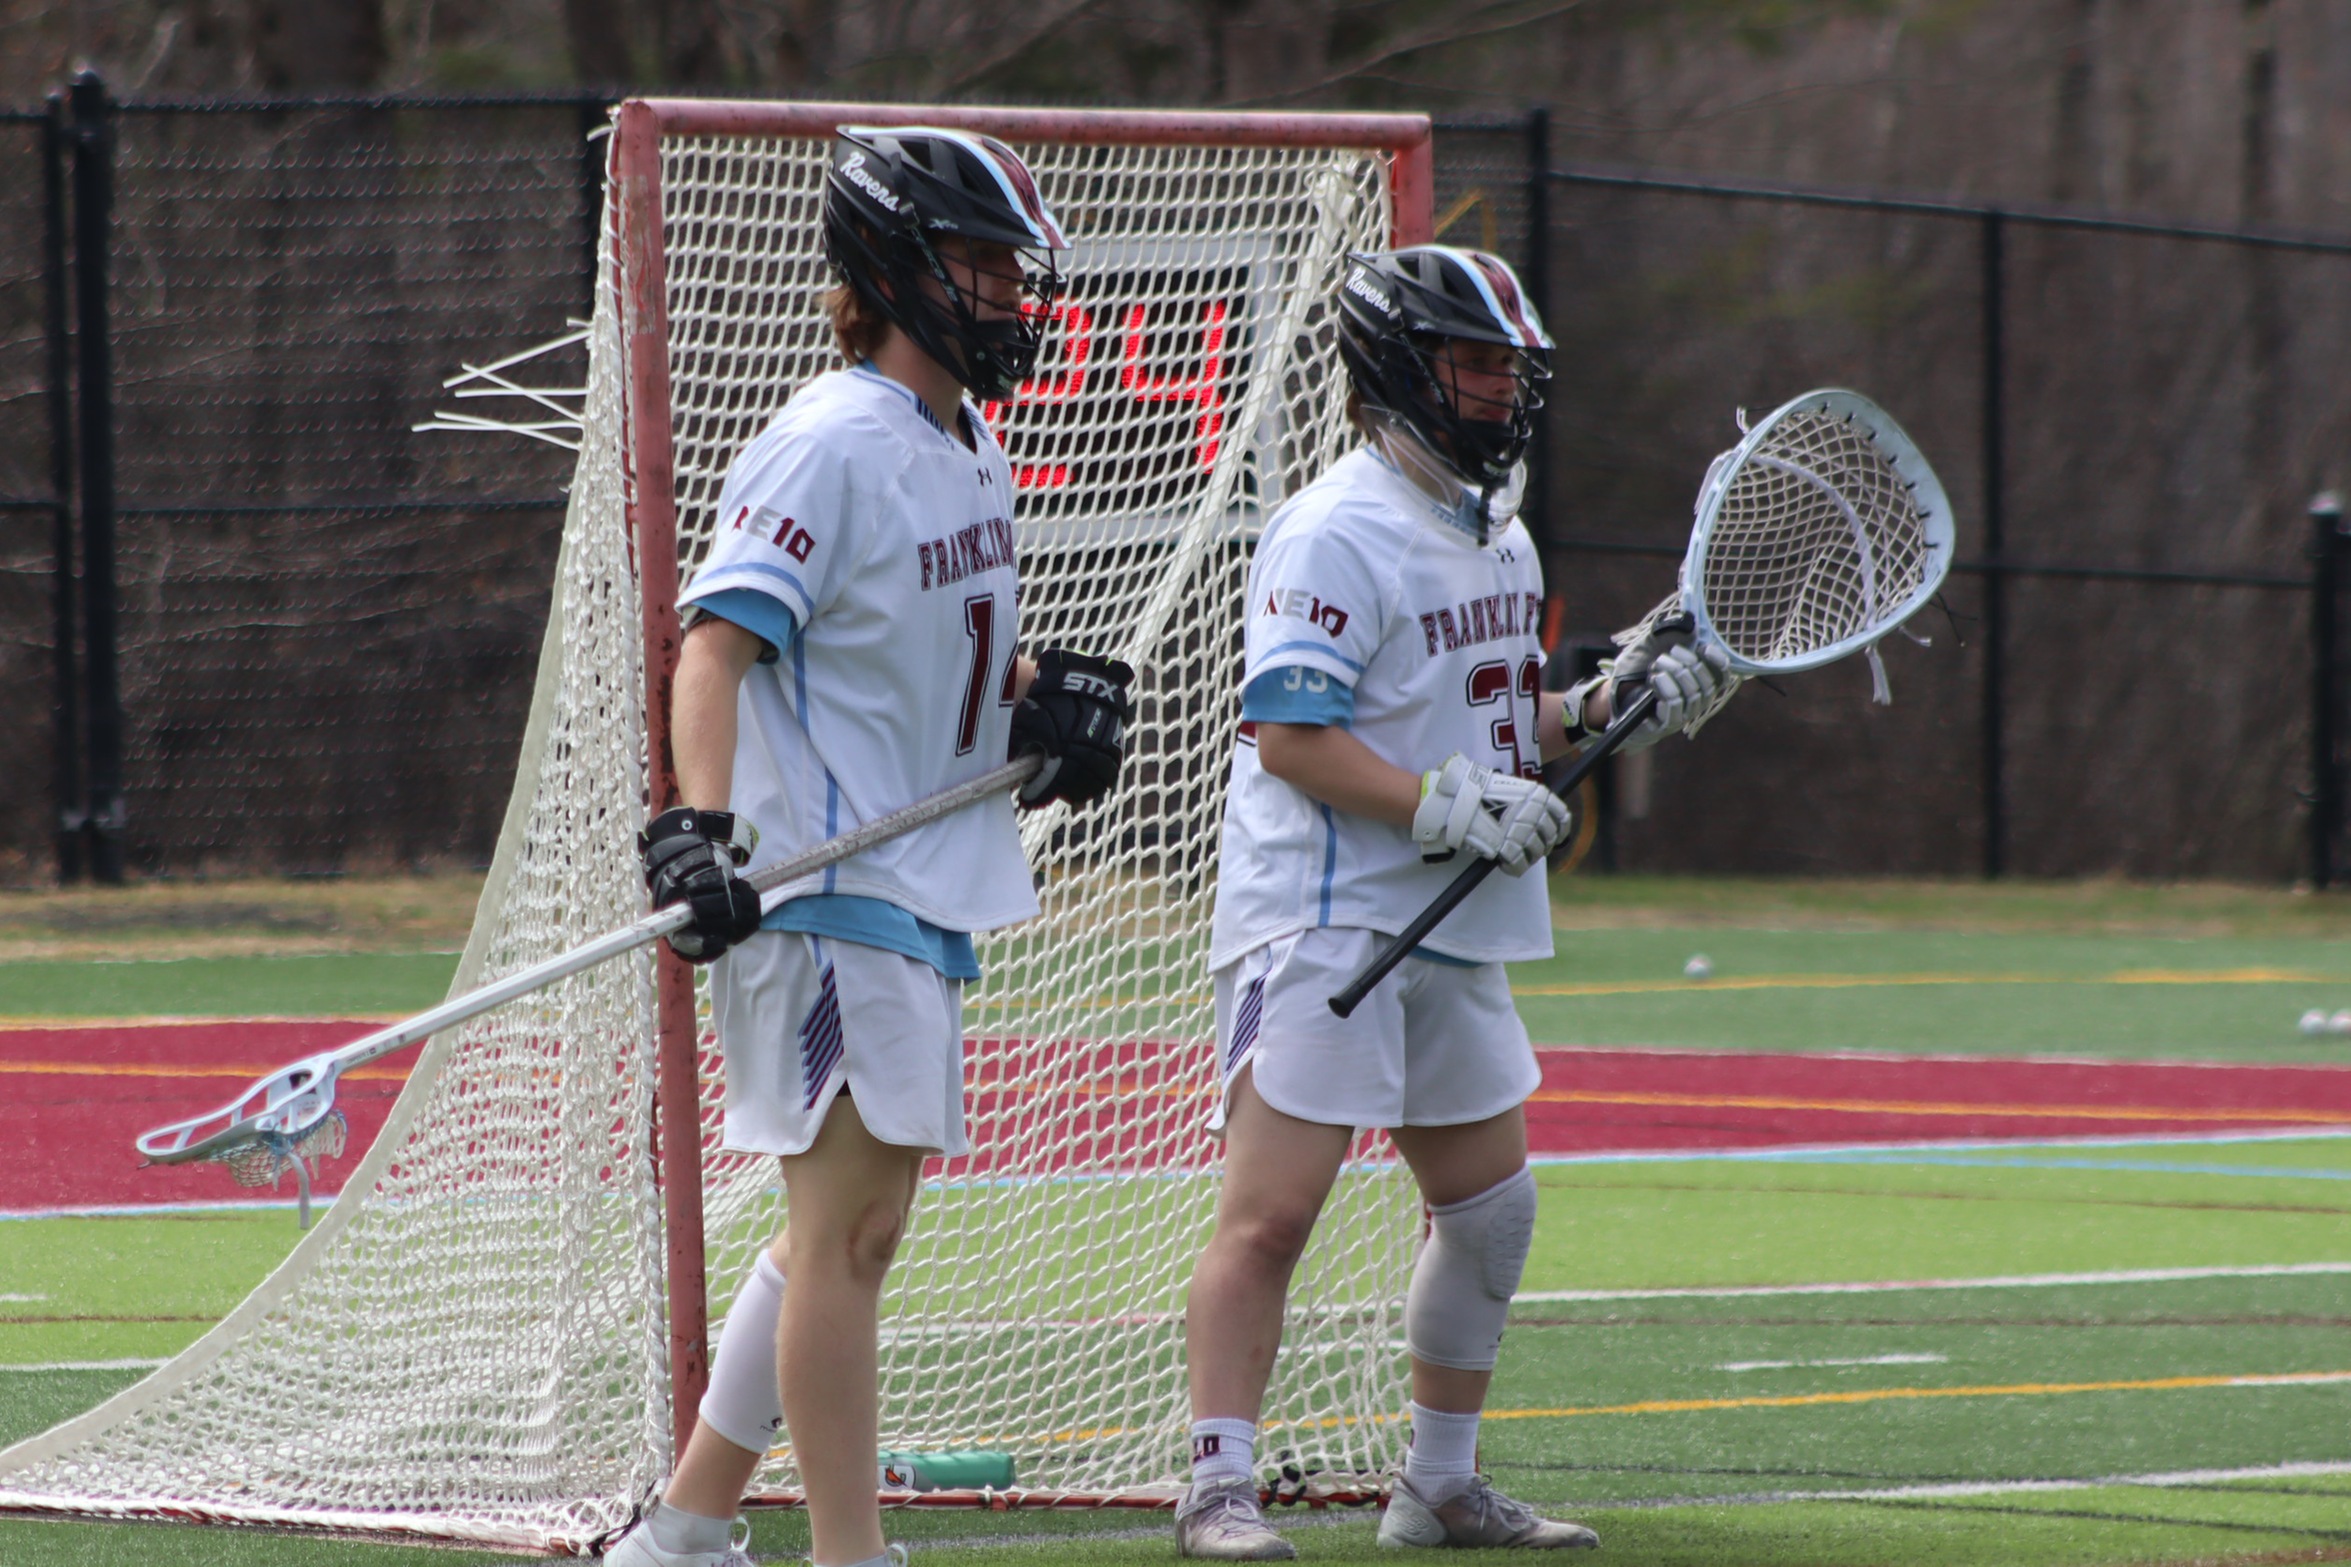 Men's Lacrosse Rallies Late, But Drops Thriller in Overtime to SNHU, 13-12